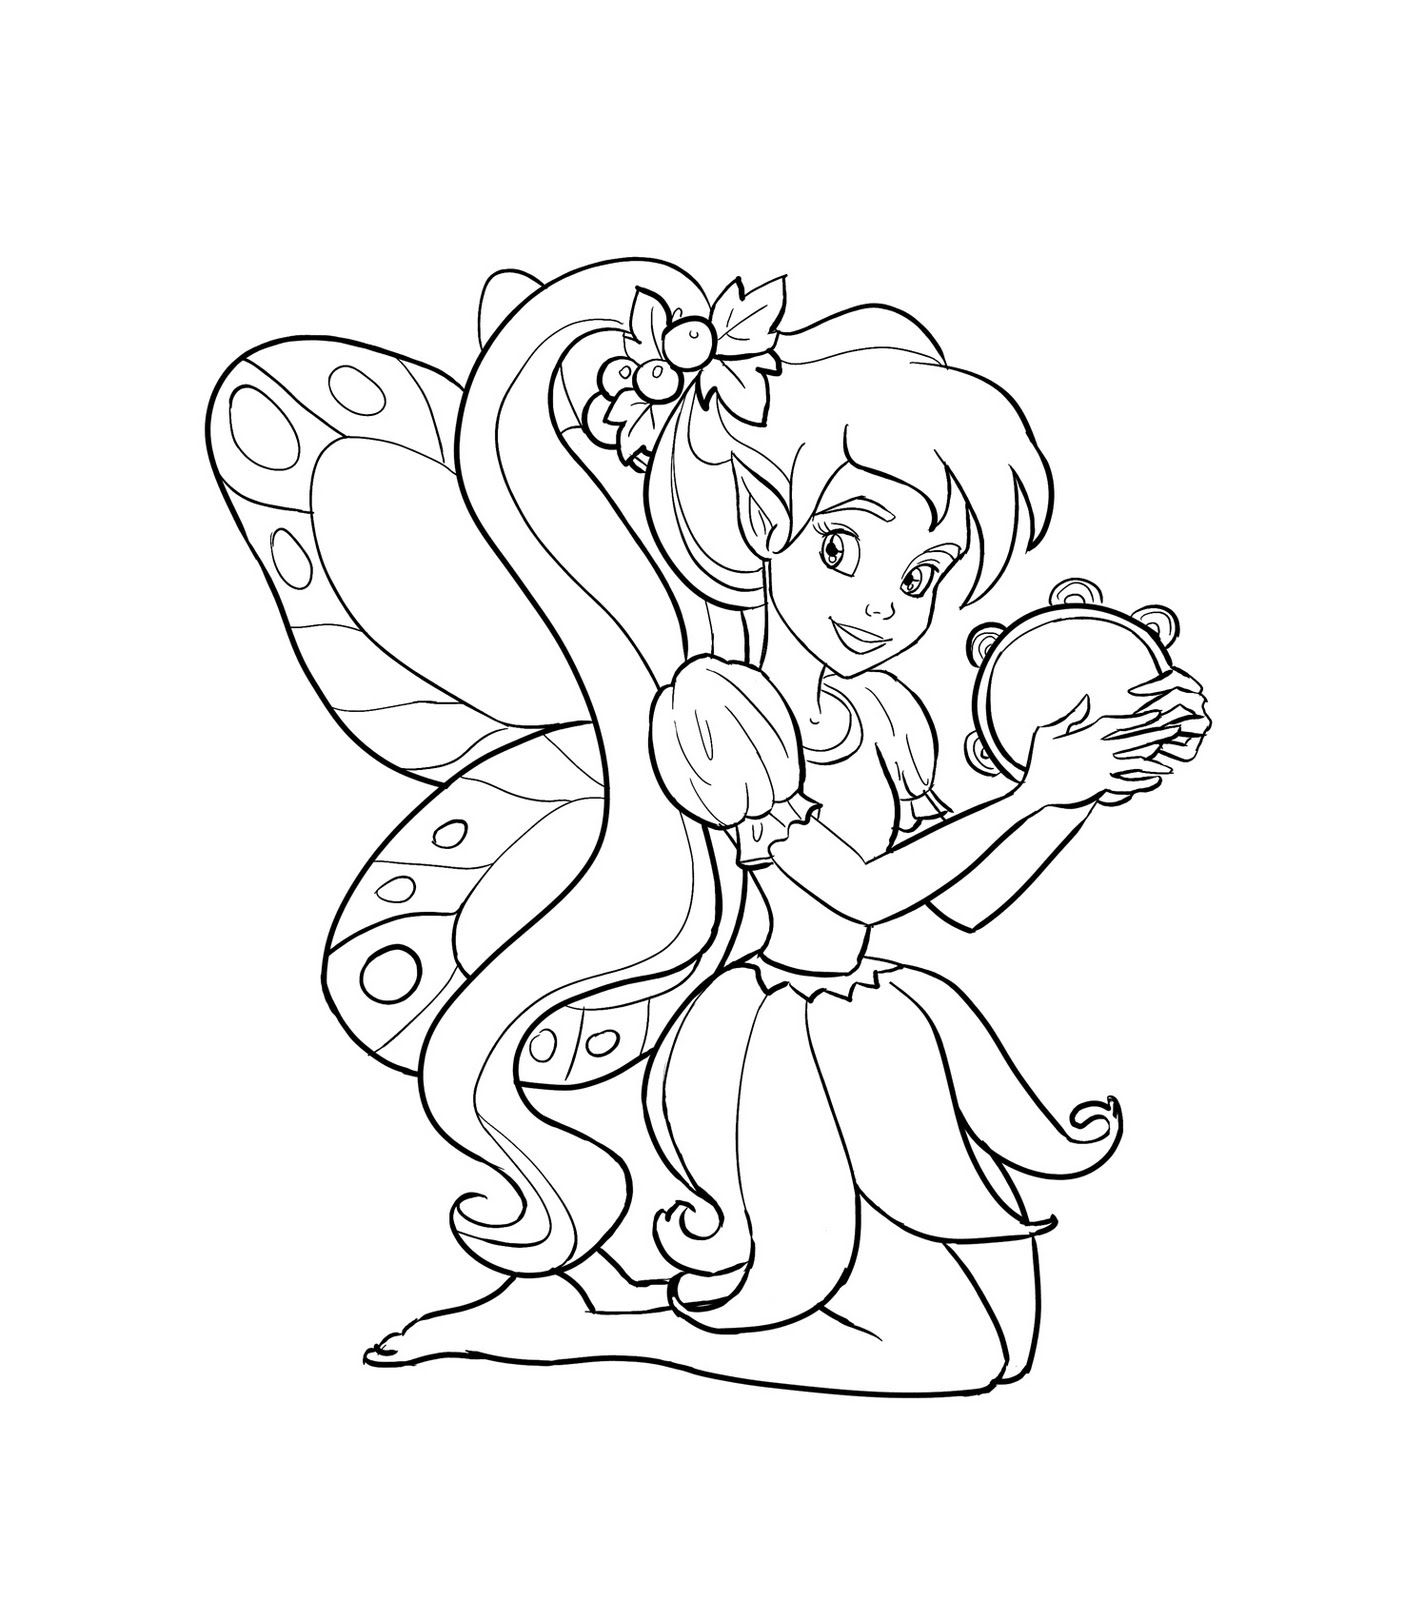 Coloring Pages : Free Printable Fairy Coloring For Kids ...